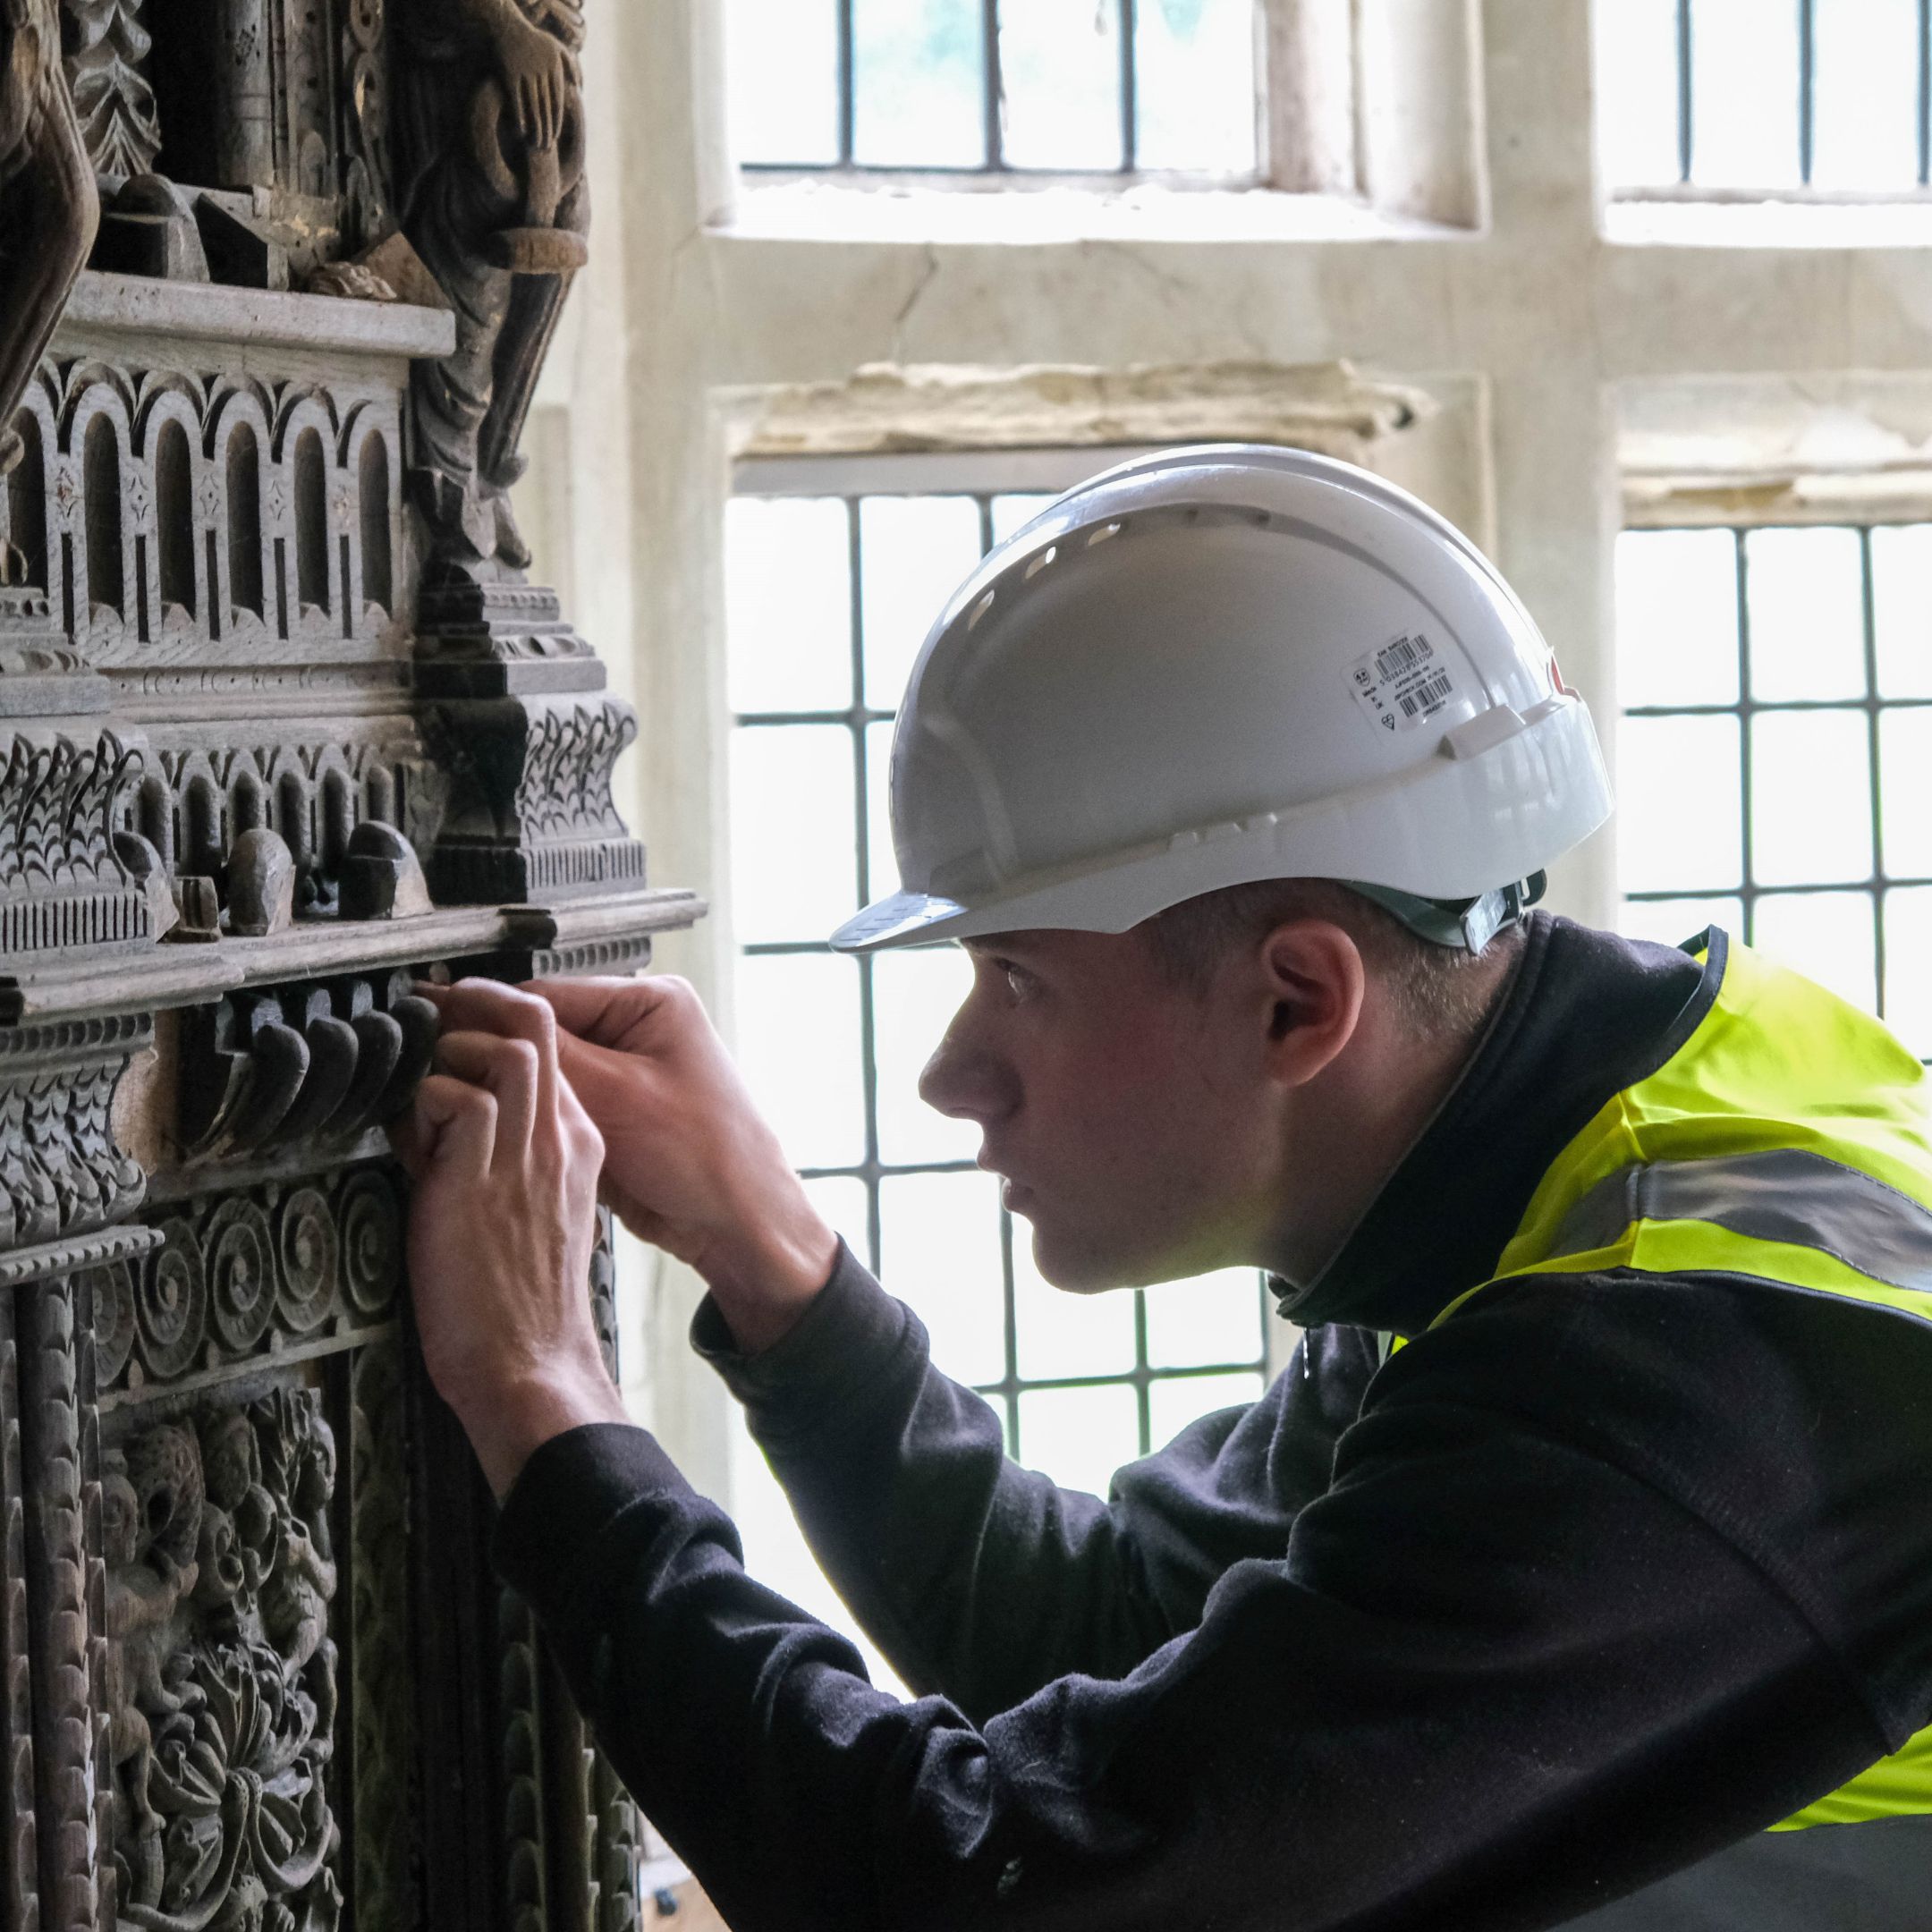 A photograph of a man in a white helmet and hi-vis jacket closely inspecting a decorative wooden object in front of a window.